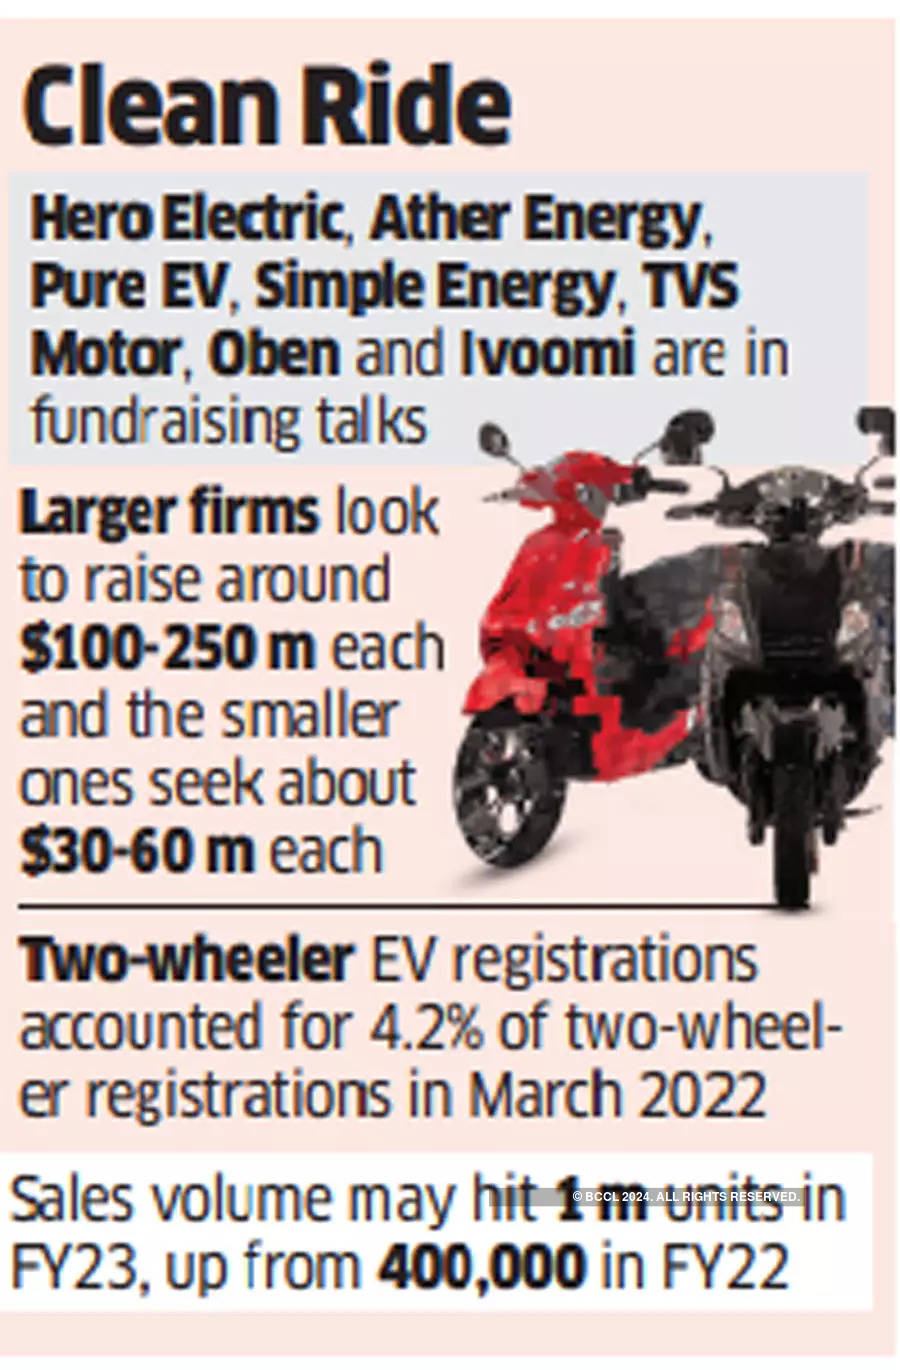 PEs to recharge two-wheeler EVs with $2 billion funding